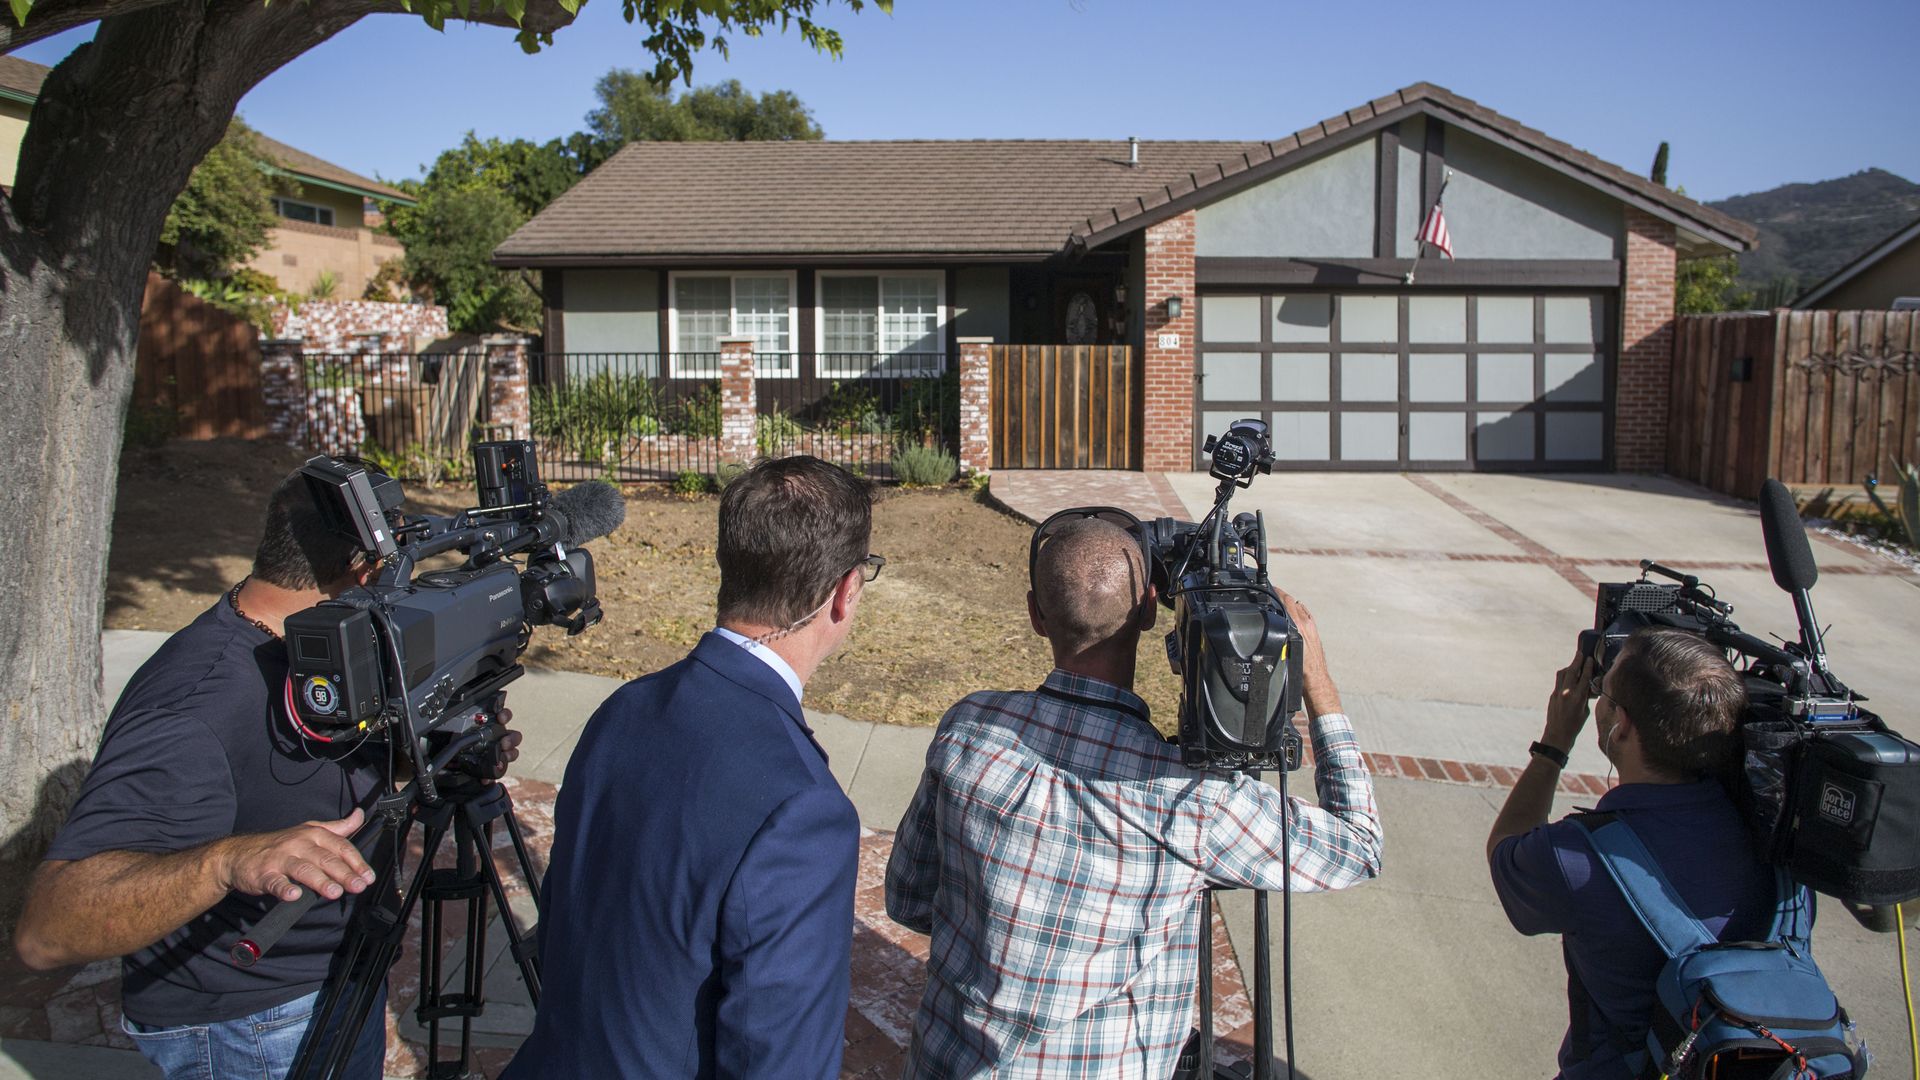 Media crowds outside of suspected California shooter's home.